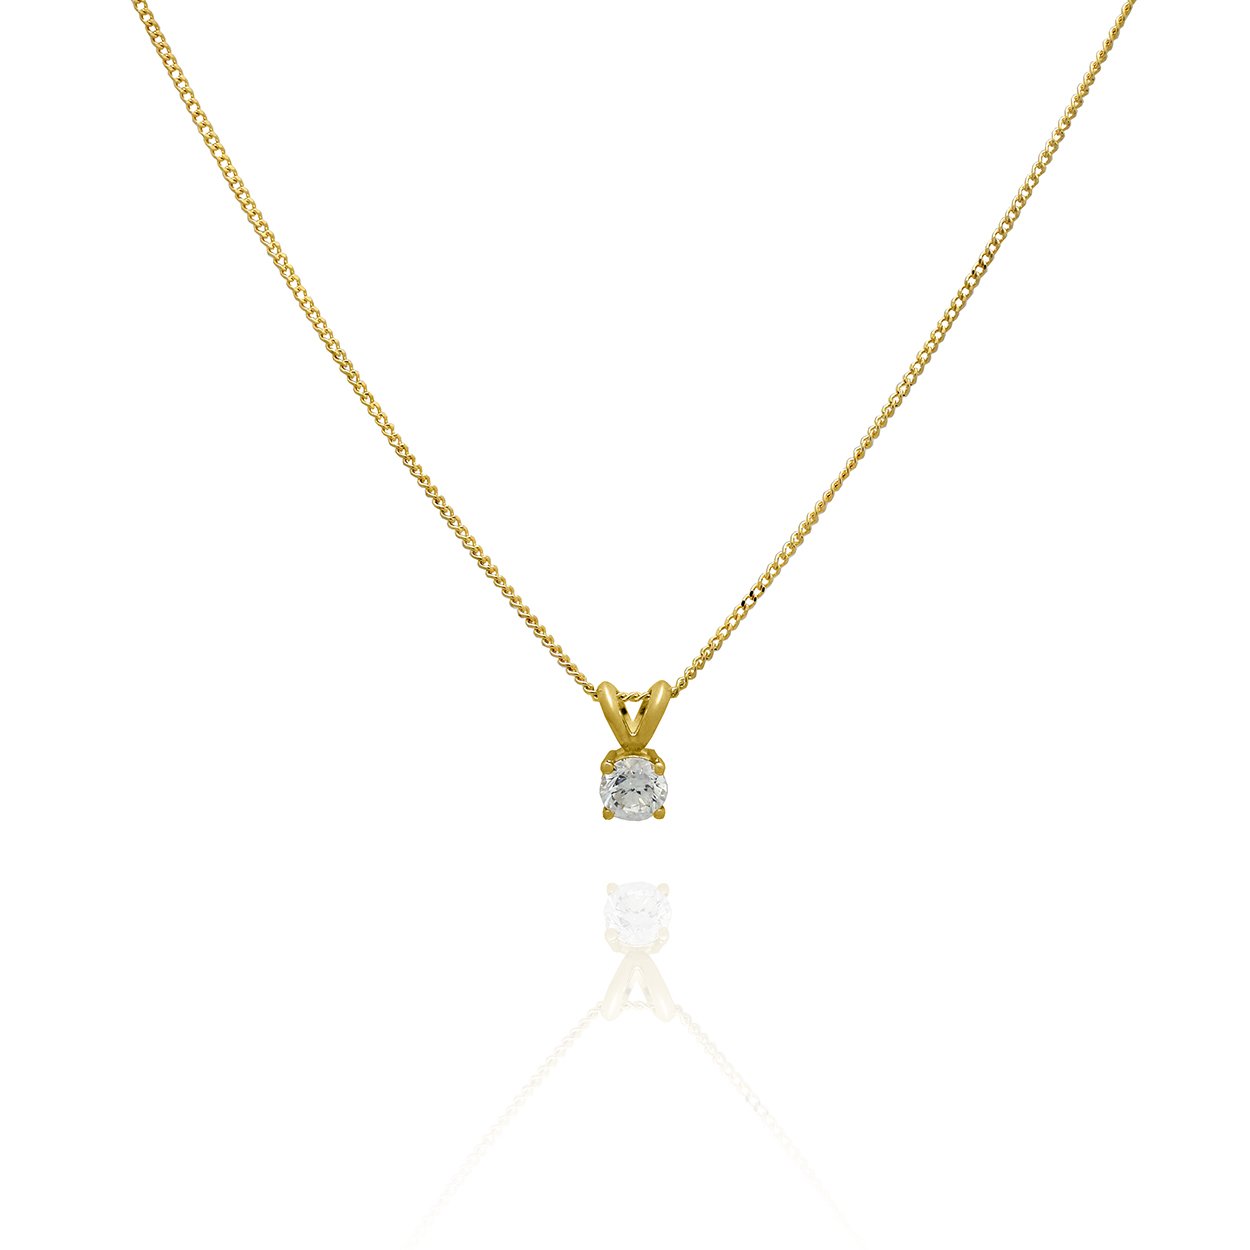 14KT Yellow Gold Diamond Necklace with Curb Chain